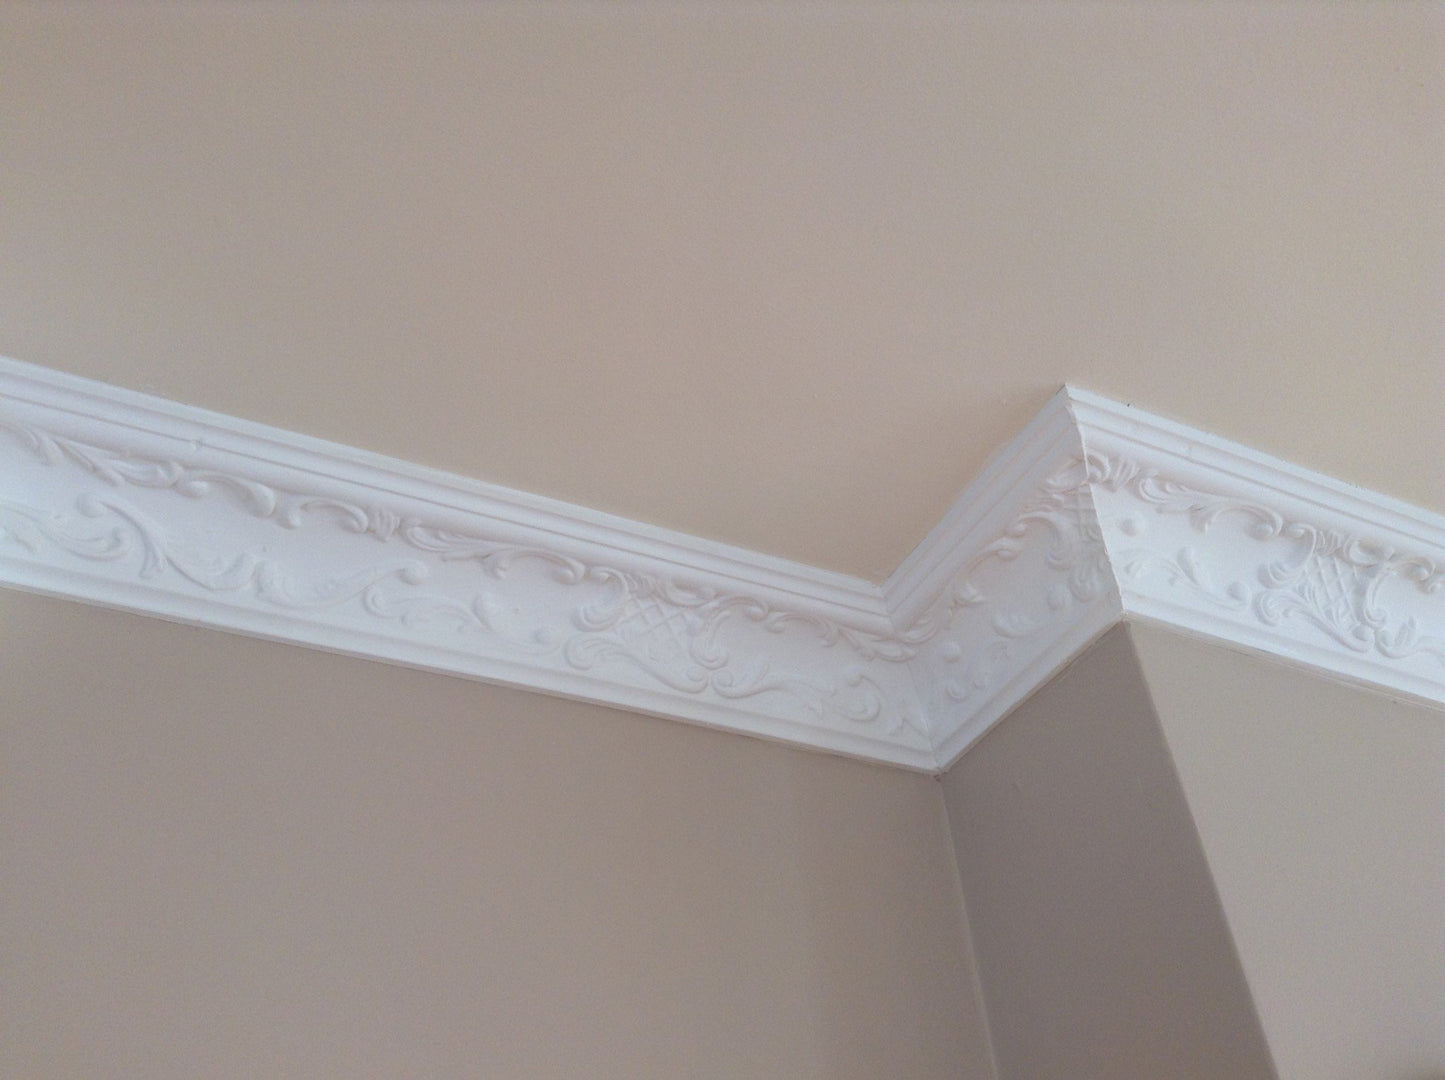 Lattice & Scroll - Classic Coving installed in a room